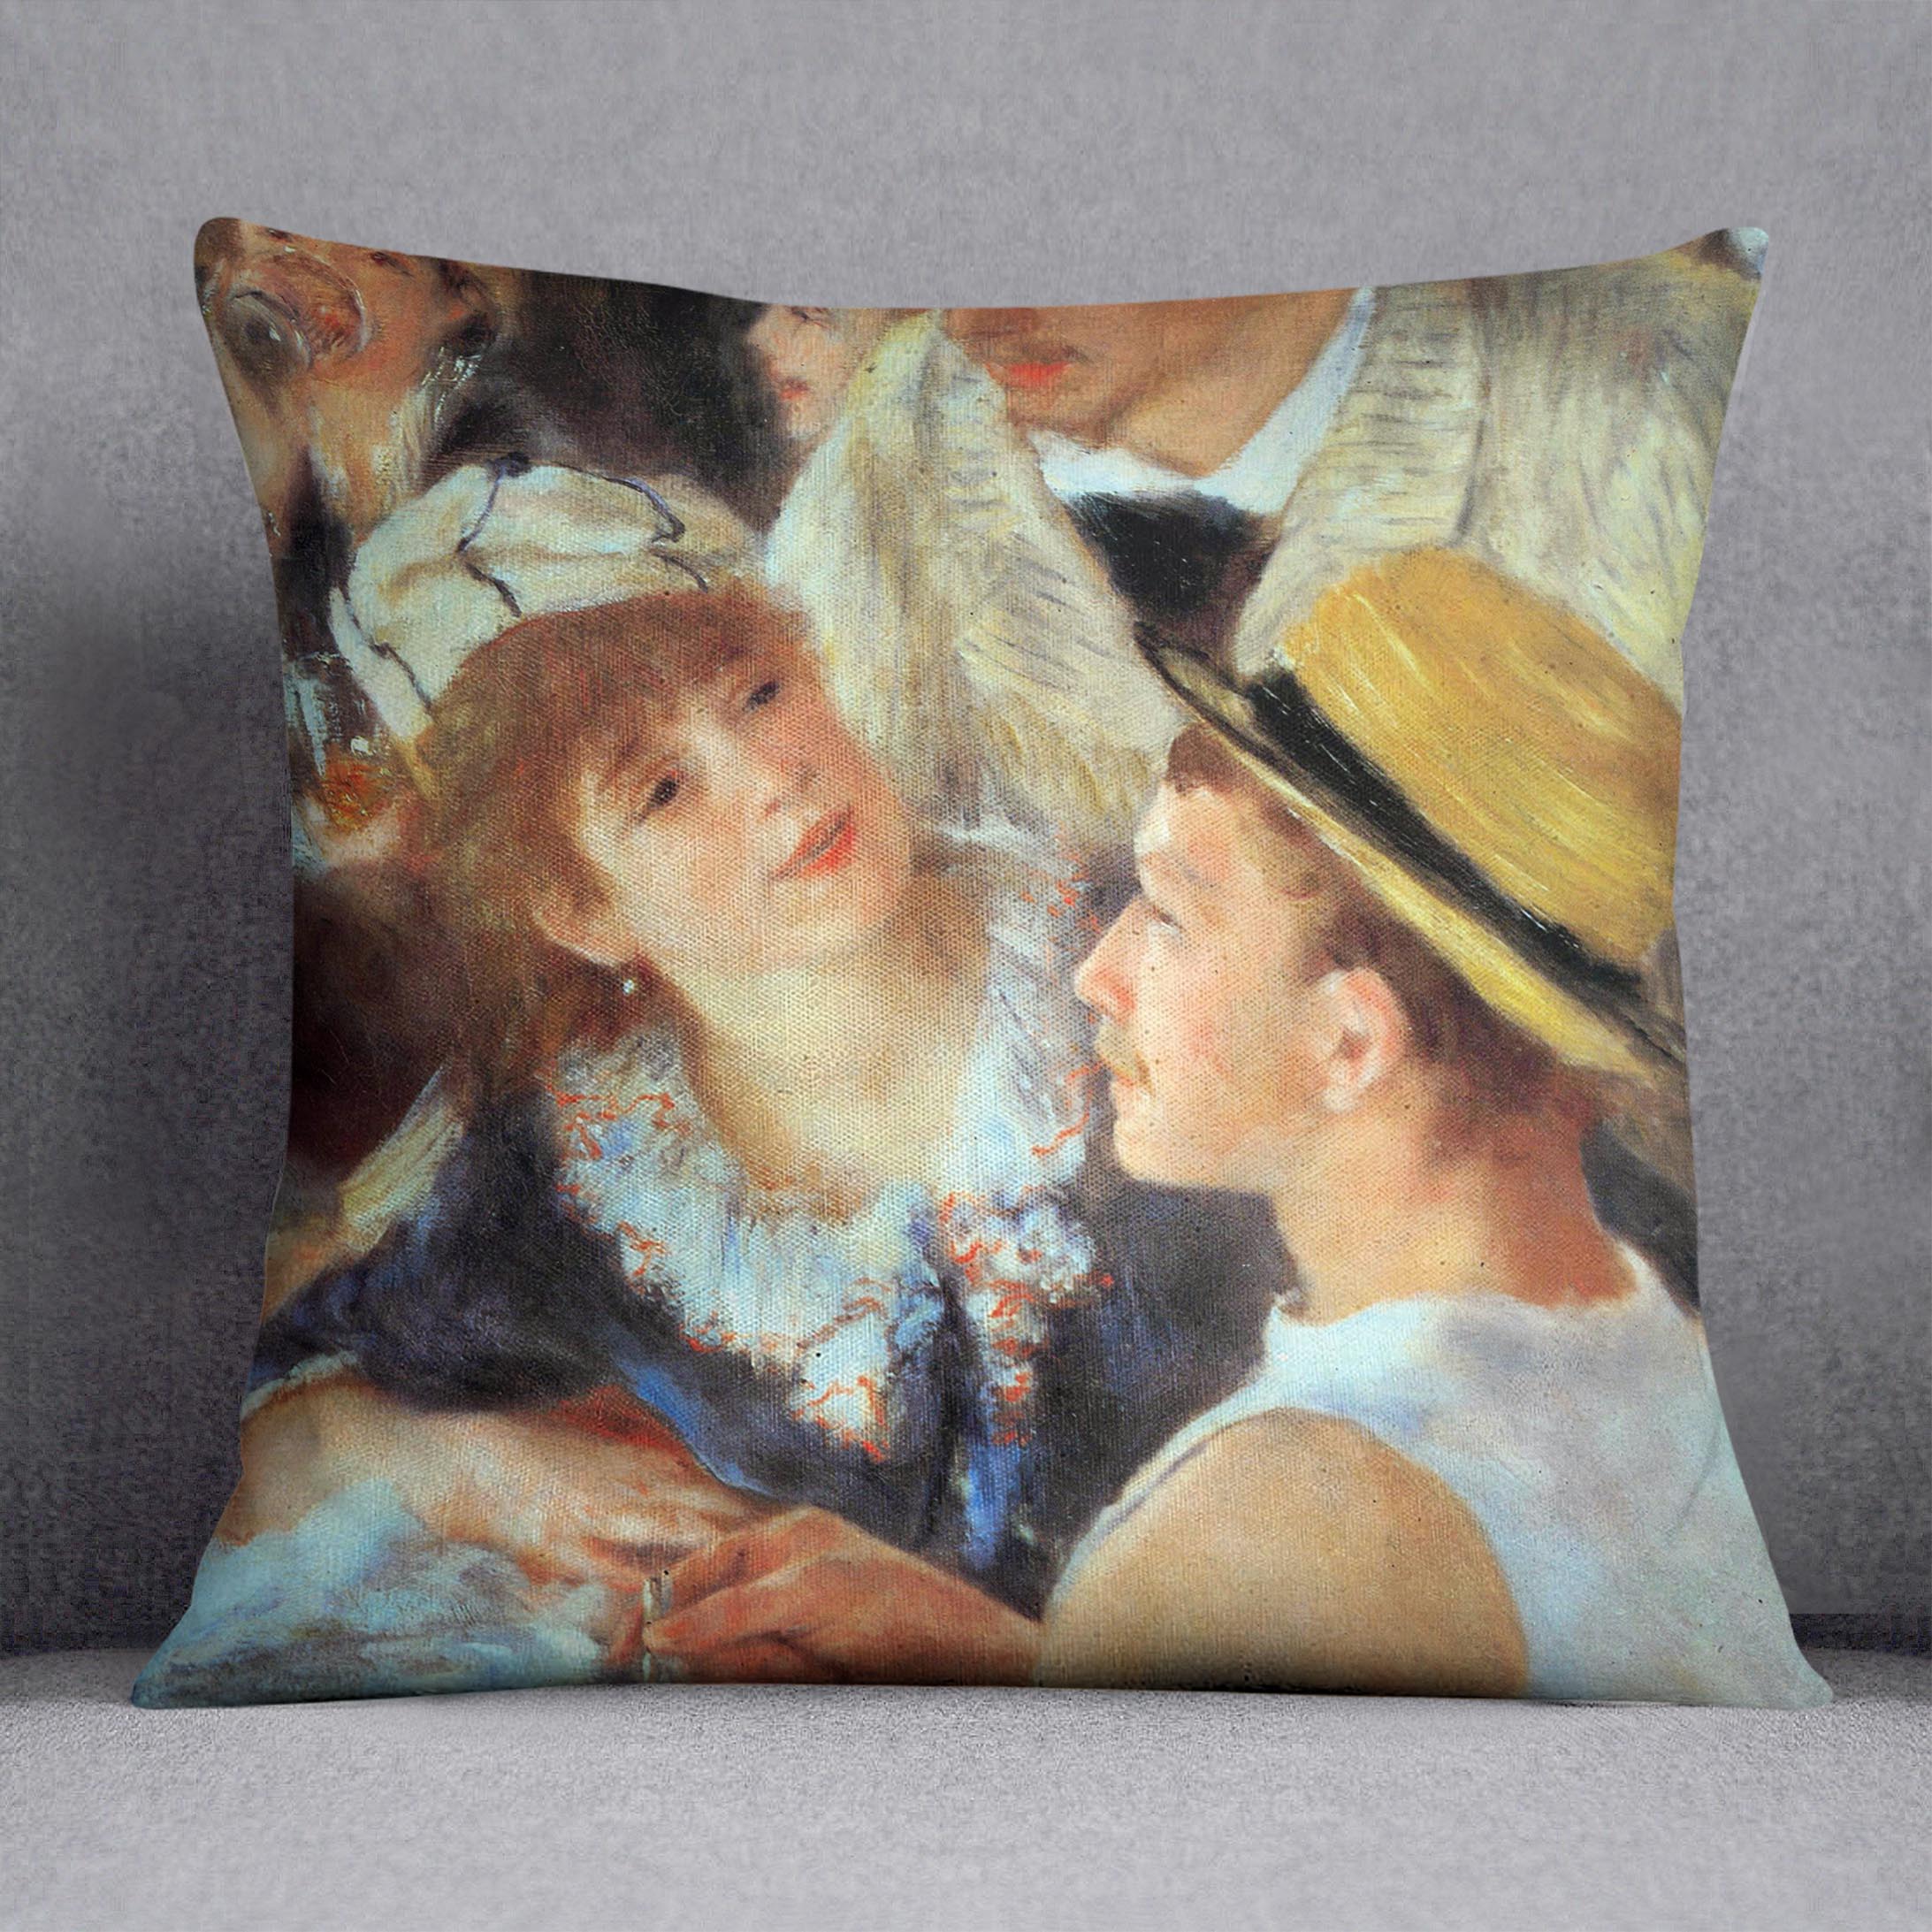 Lunch on the boat party detail by Renoir Cushion